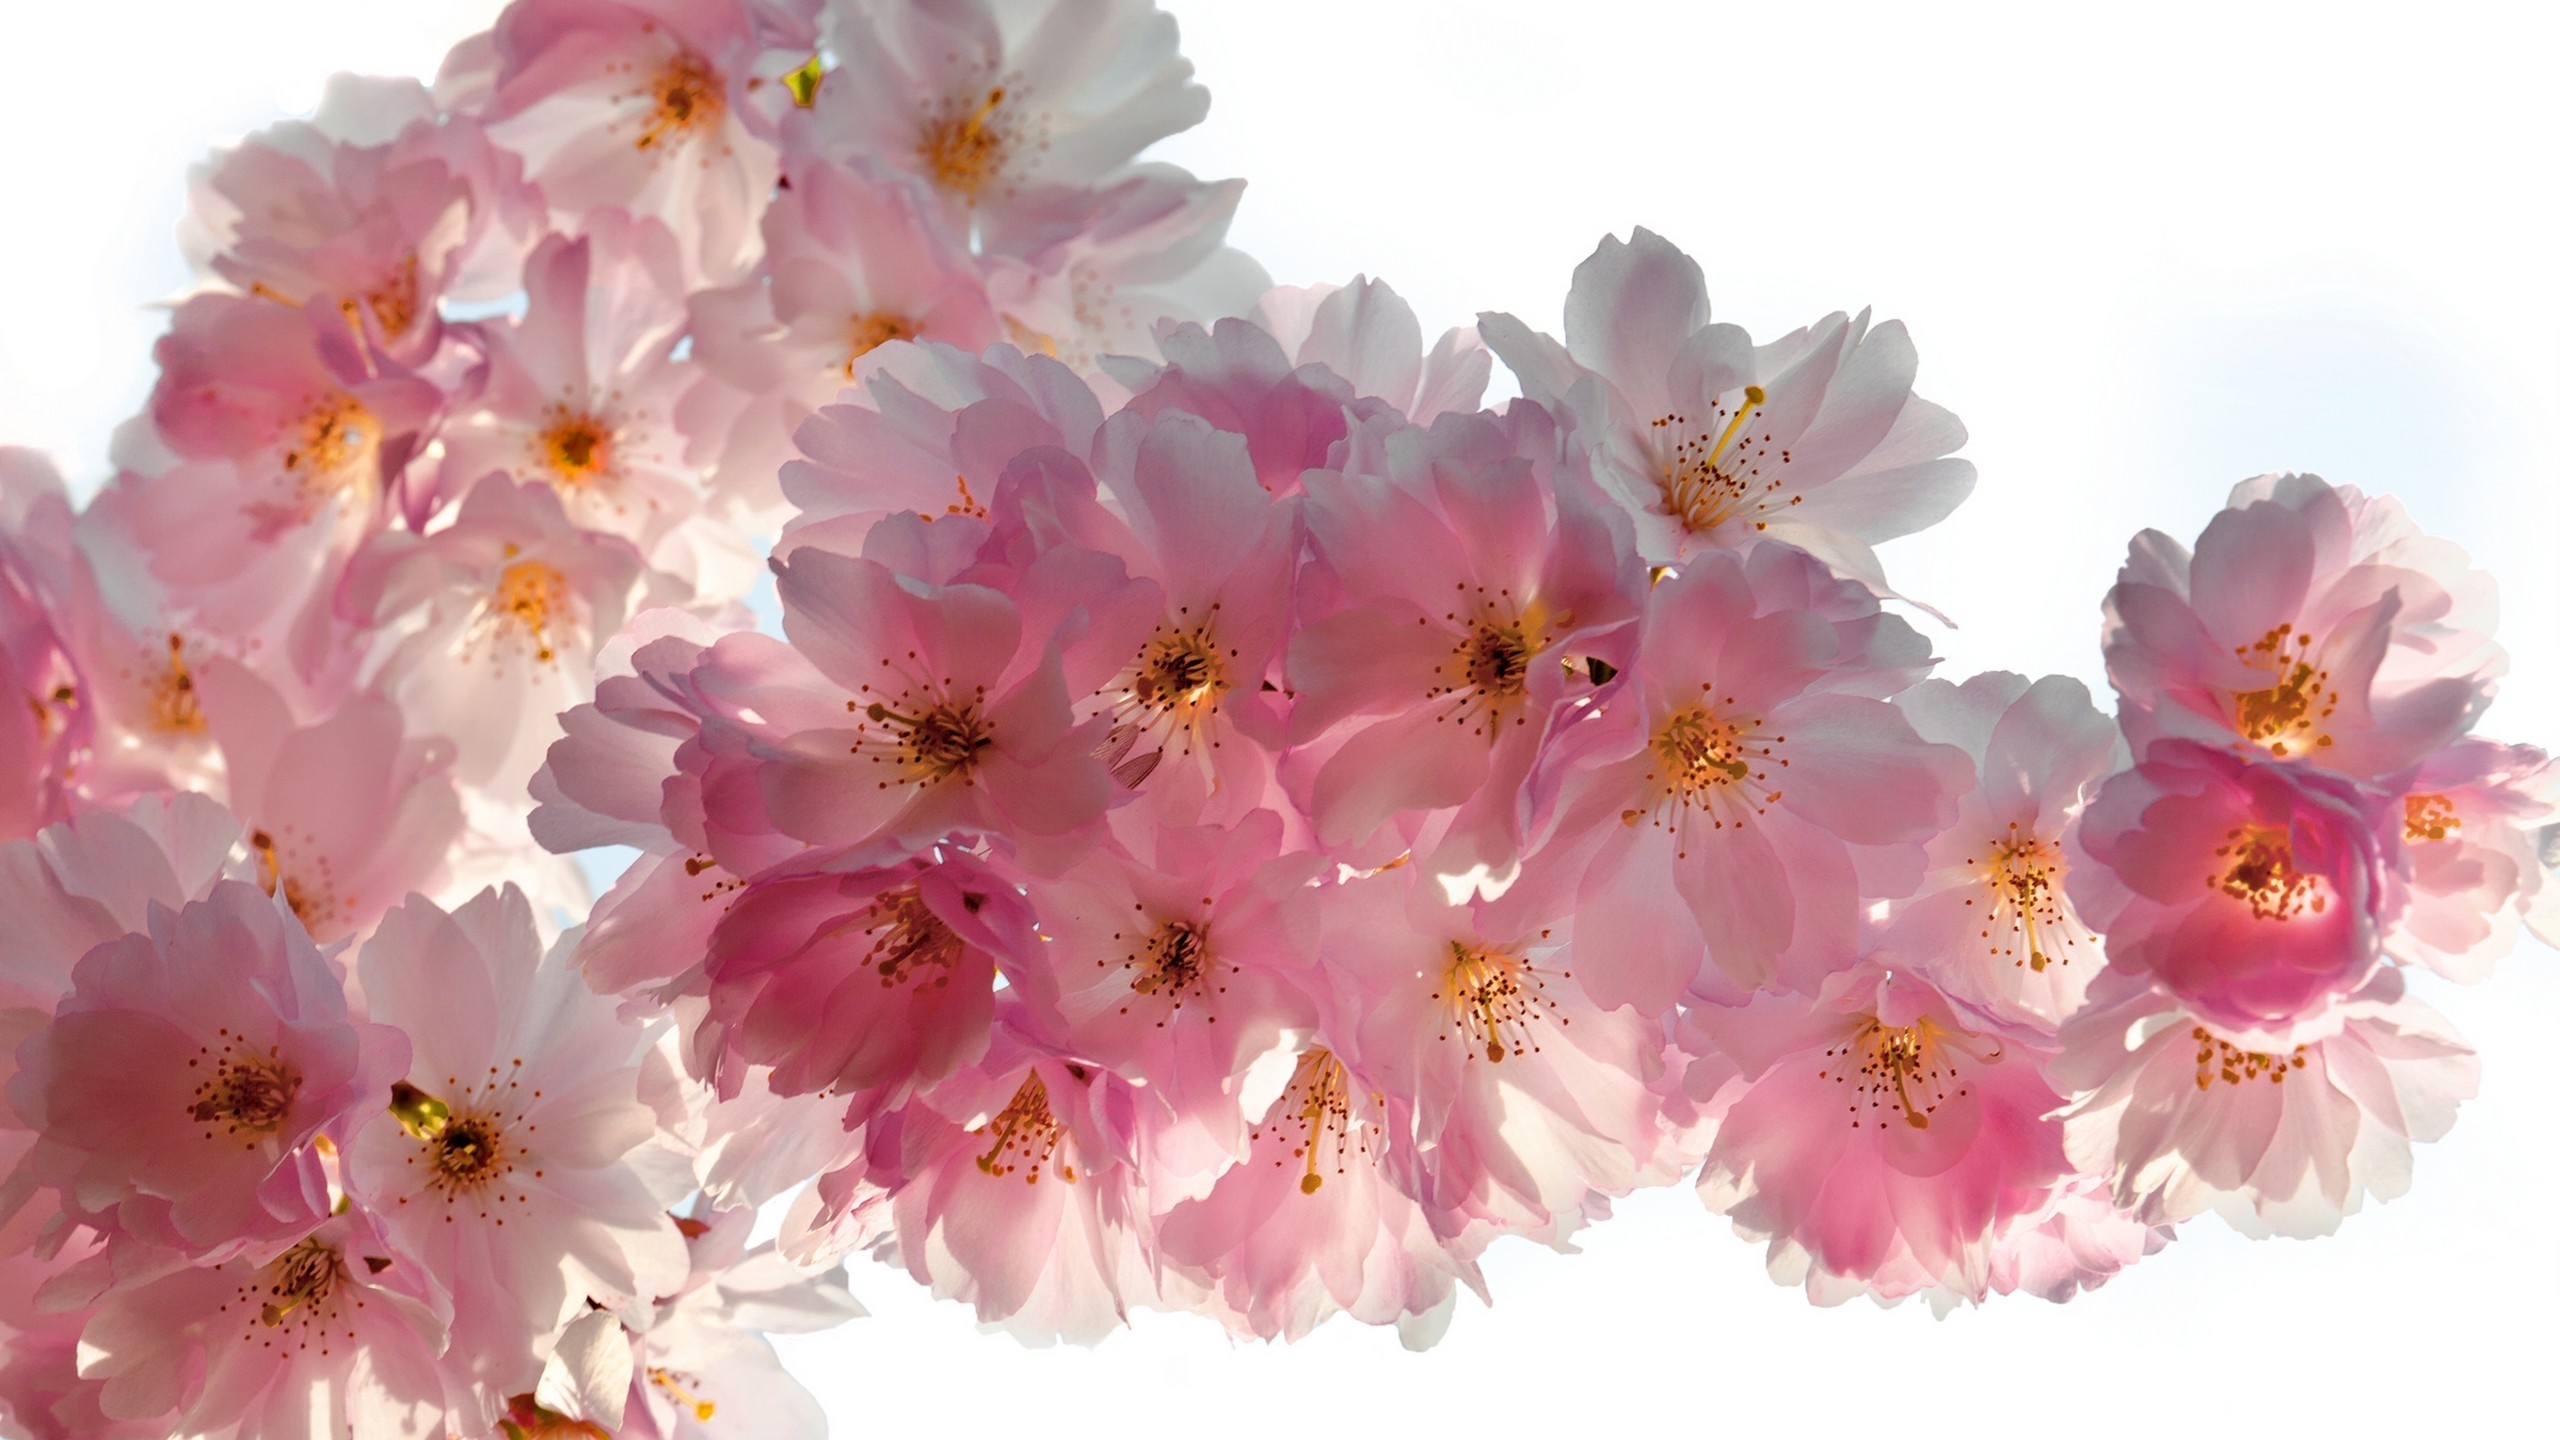 Beautiful Cherry Flowers for 2560x1440 HDTV resolution